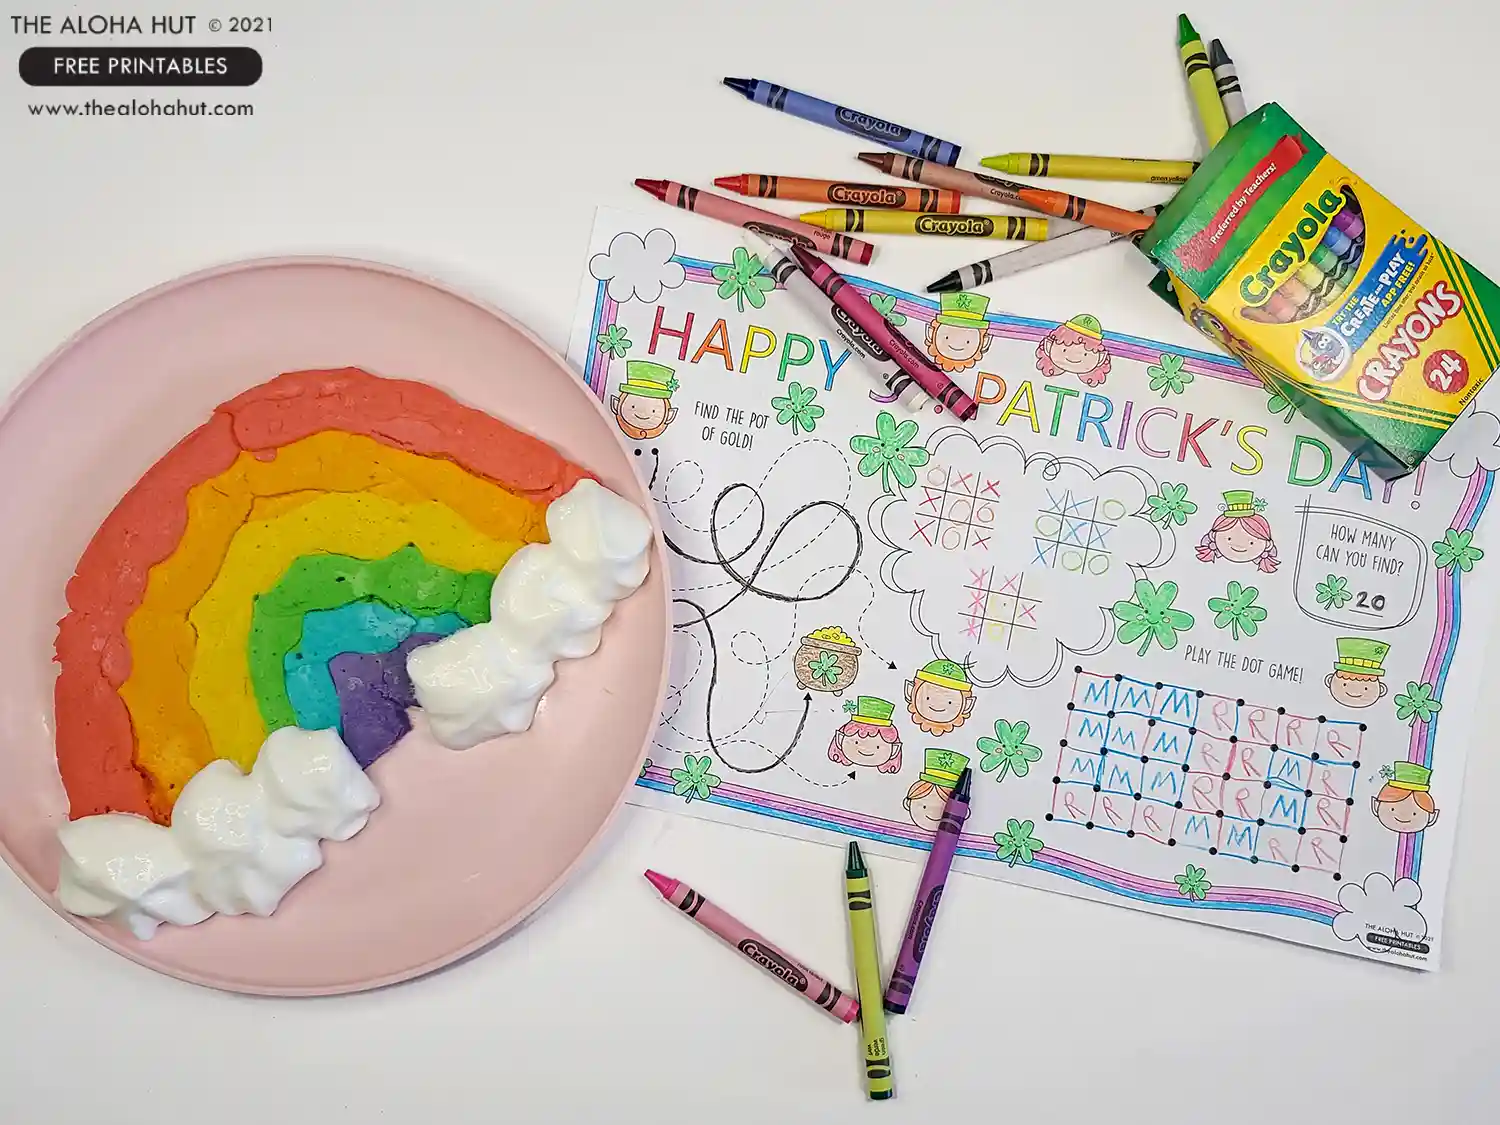 St. Patrick's Day printable placemat, coloring page, and activity sheet for kids. Download our St. Patrick's Day coloring page for a fun placemat for your St. Patrick's Day rainbow themed breakfast or meal.